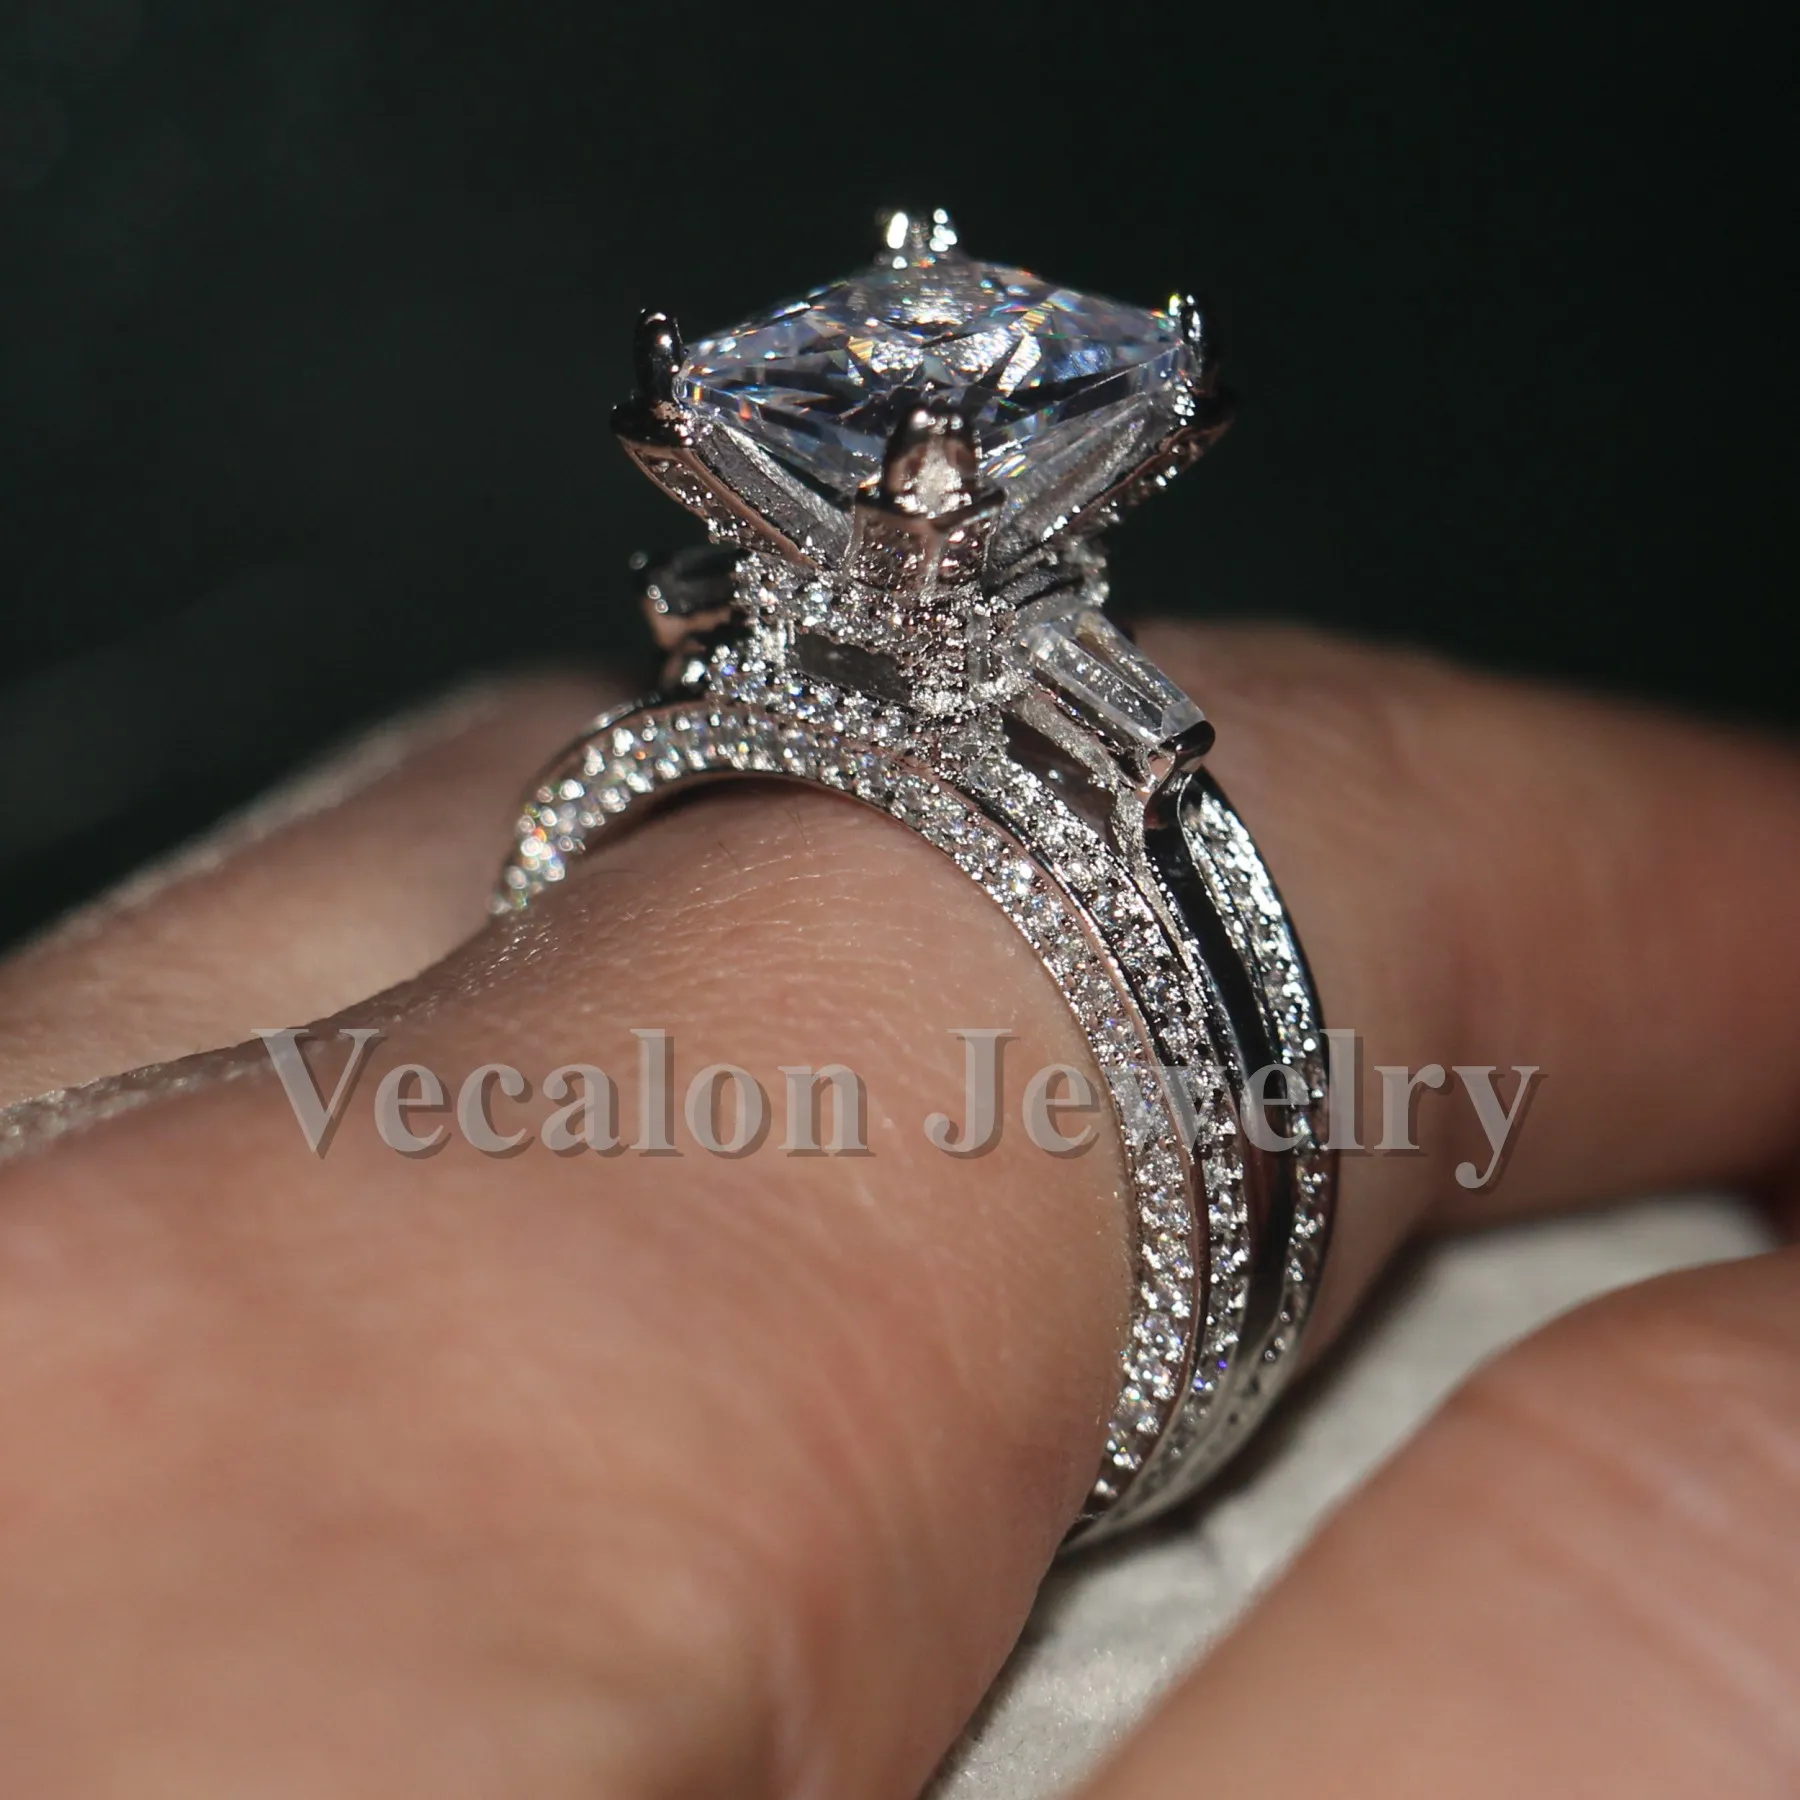 Vecalon Eiffel Tower Women Big Jewelry ring 10ct 5A Zircon stone Cz 925 Sterling Silver Engagement Wedding Band Ring